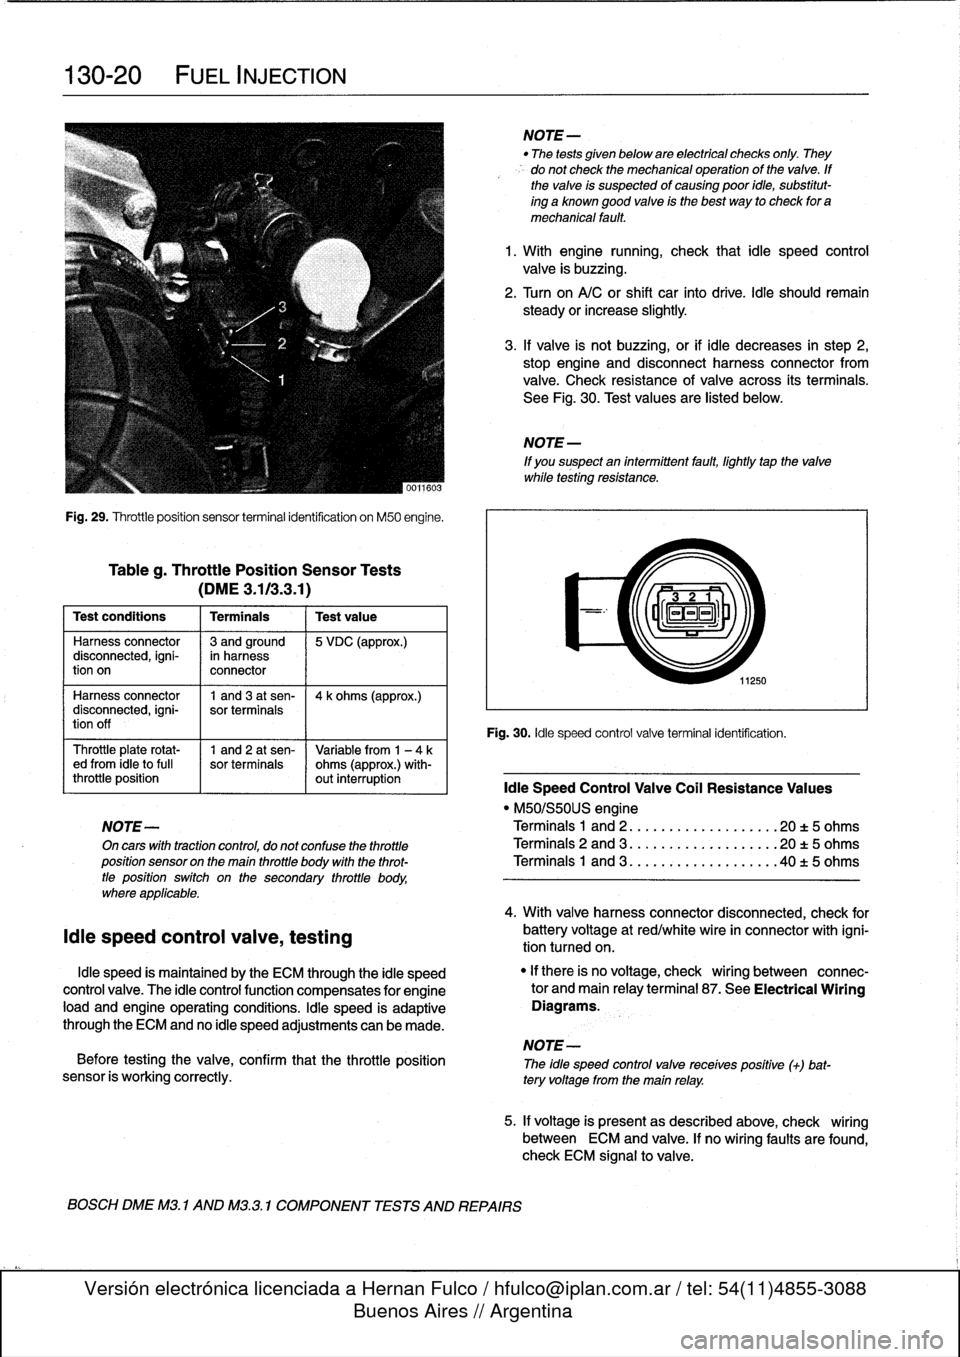 BMW M3 1993 E36 Workshop Manual 
130-20

	

FUEL
INJECTION

Fig
.
29
.
Throttleposition
sensor
terminal
identification
on
M50
engine
.

Tableg
.
Throttle
Position
Sensor
Tests

(DME3
.113
.3
.1)

Test
conditions

	

I
Terminals

	

